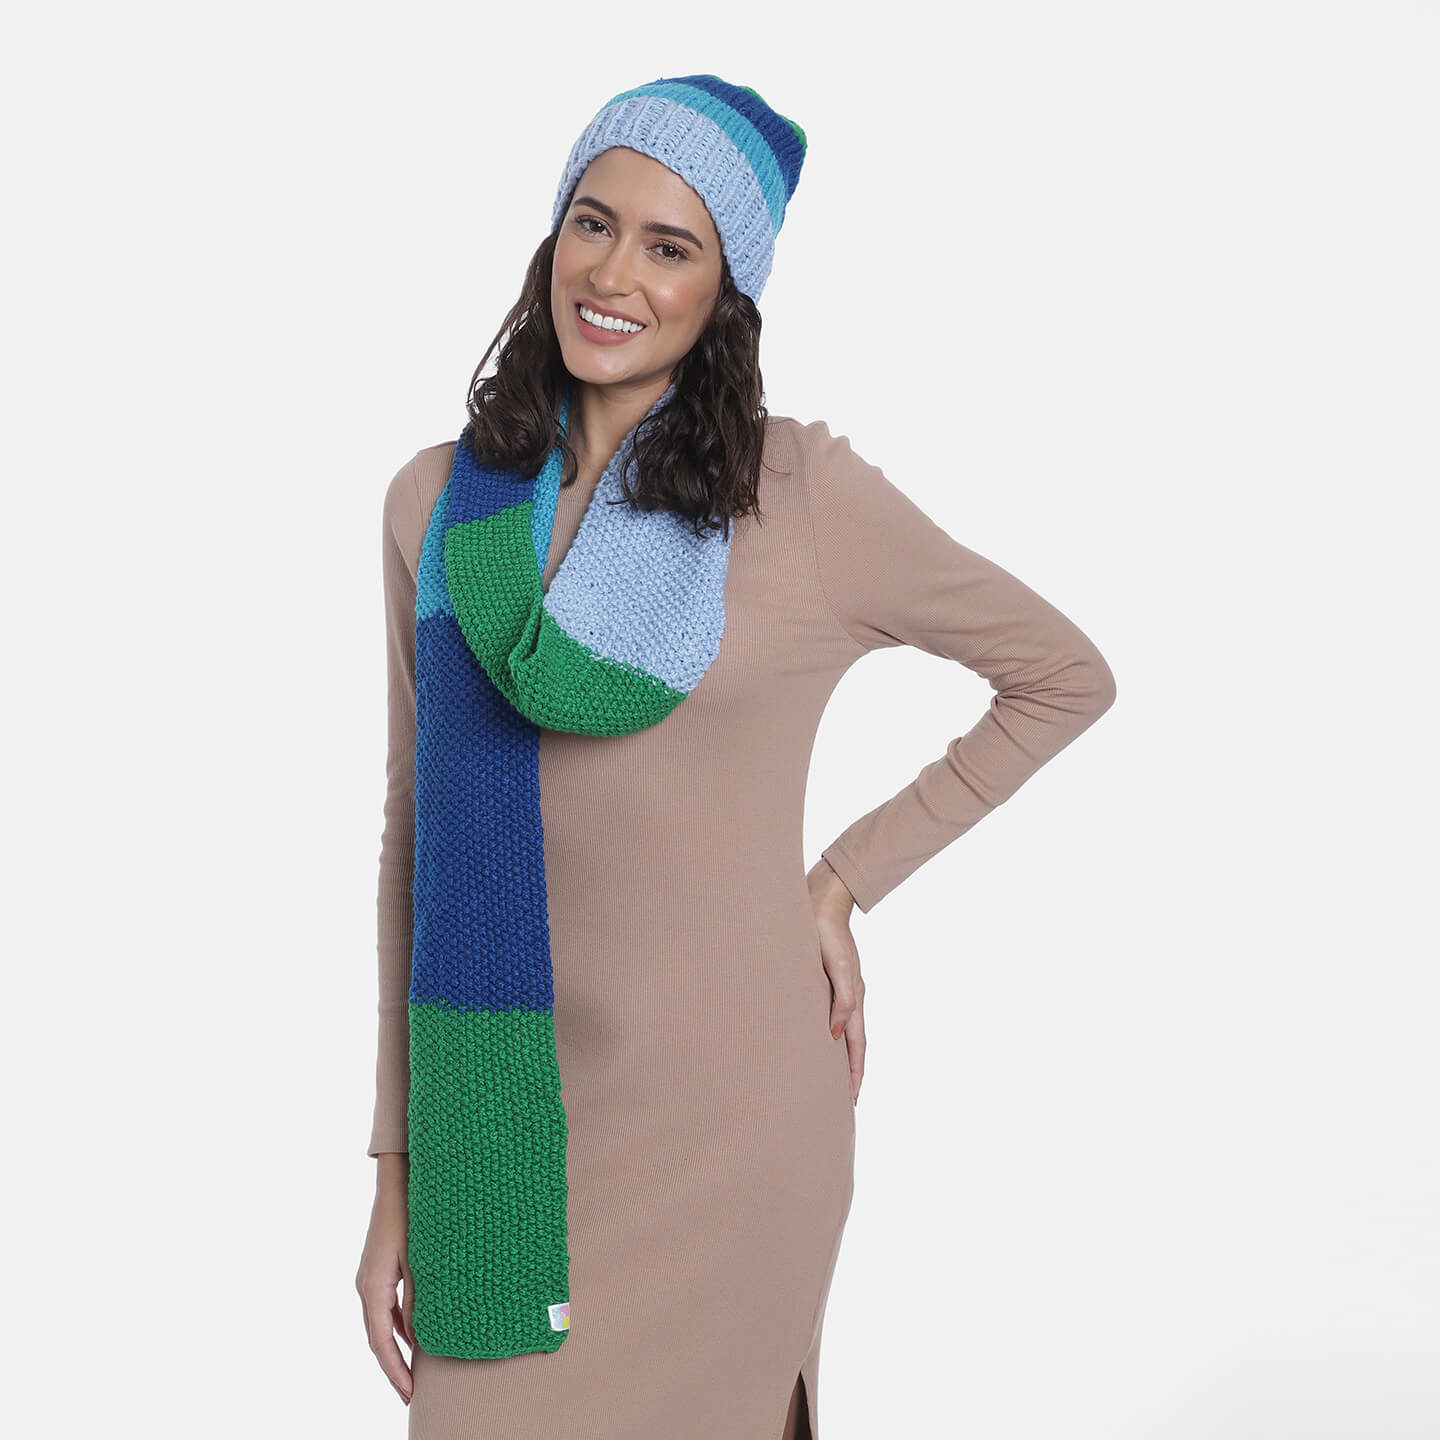 Beanie and Scarf Coordinating Set - 3305